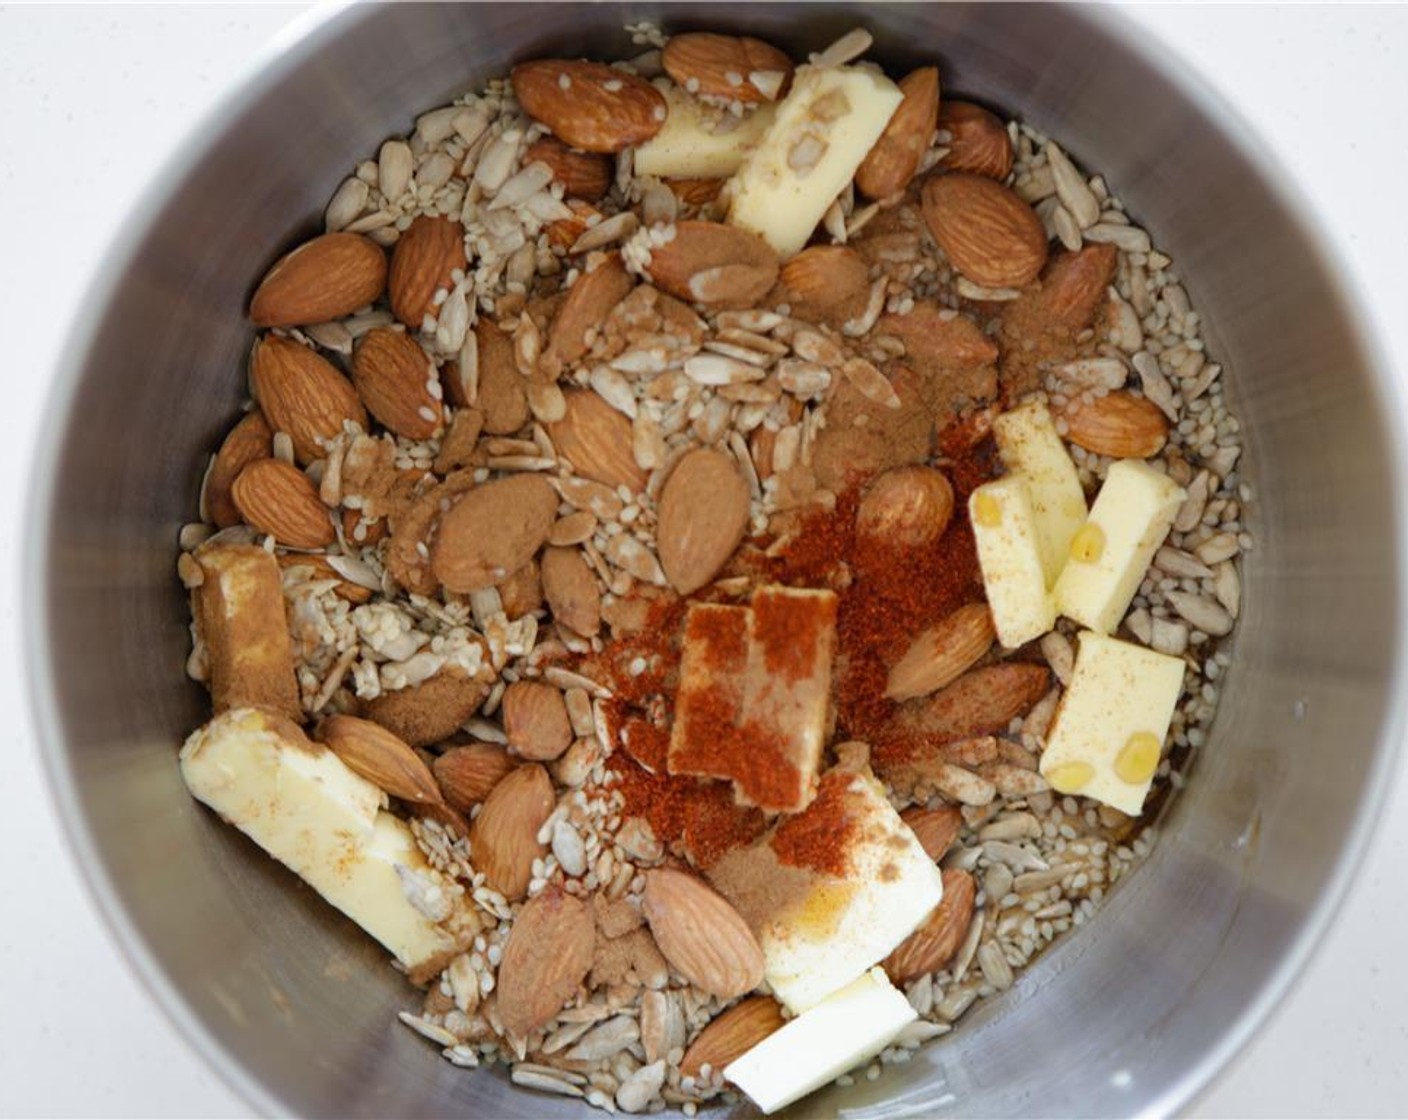 step 2 Mix Raw Almonds (1/2 cup), Pepitas (1/4 cup), Sunflower Seeds (1/4 cup), Sesame Seeds (1/4 cup), Maple Syrup (1/3 cup), Butter (2 Tbsp), Ground Cinnamon (1/4 tsp), Cayenne Pepper (1/8 tsp) and Salt (1 pinch) in a bowl.